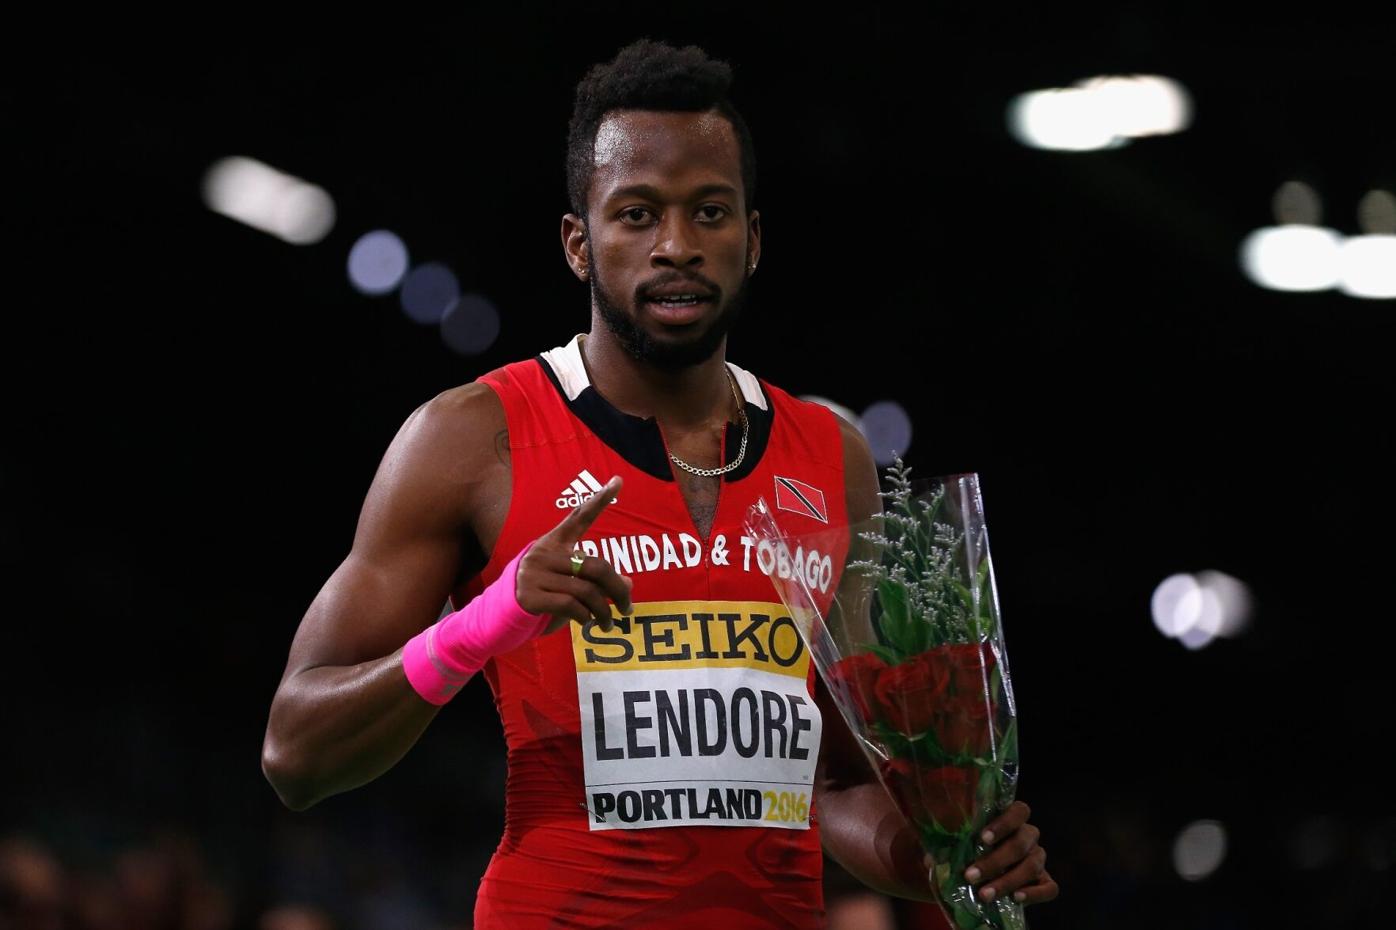 FLASHBACK: Bronze medallist Deon Lendore of Trinidad and Tobago celebrates after the men’s 400 metres final, at the 2016 IAAF World Indoor Championships in Portland, Oregon, USA. Photo: GETTY IMAGES FOR IAAF